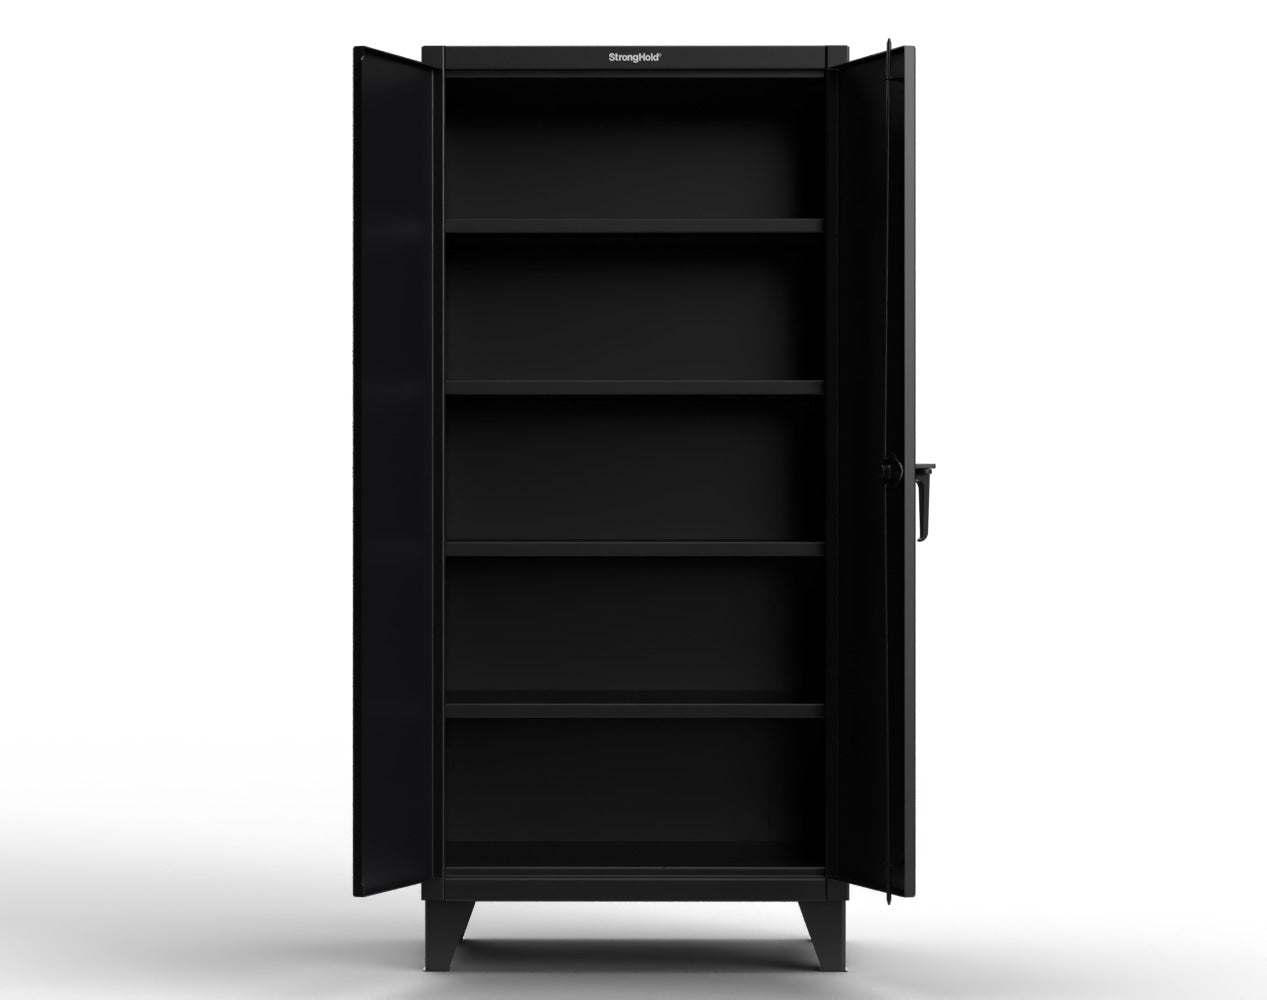 Extreme Duty 12 GA Cabinet with 4 Shelves - 36 In. W x 24 In. D x 78 In. H